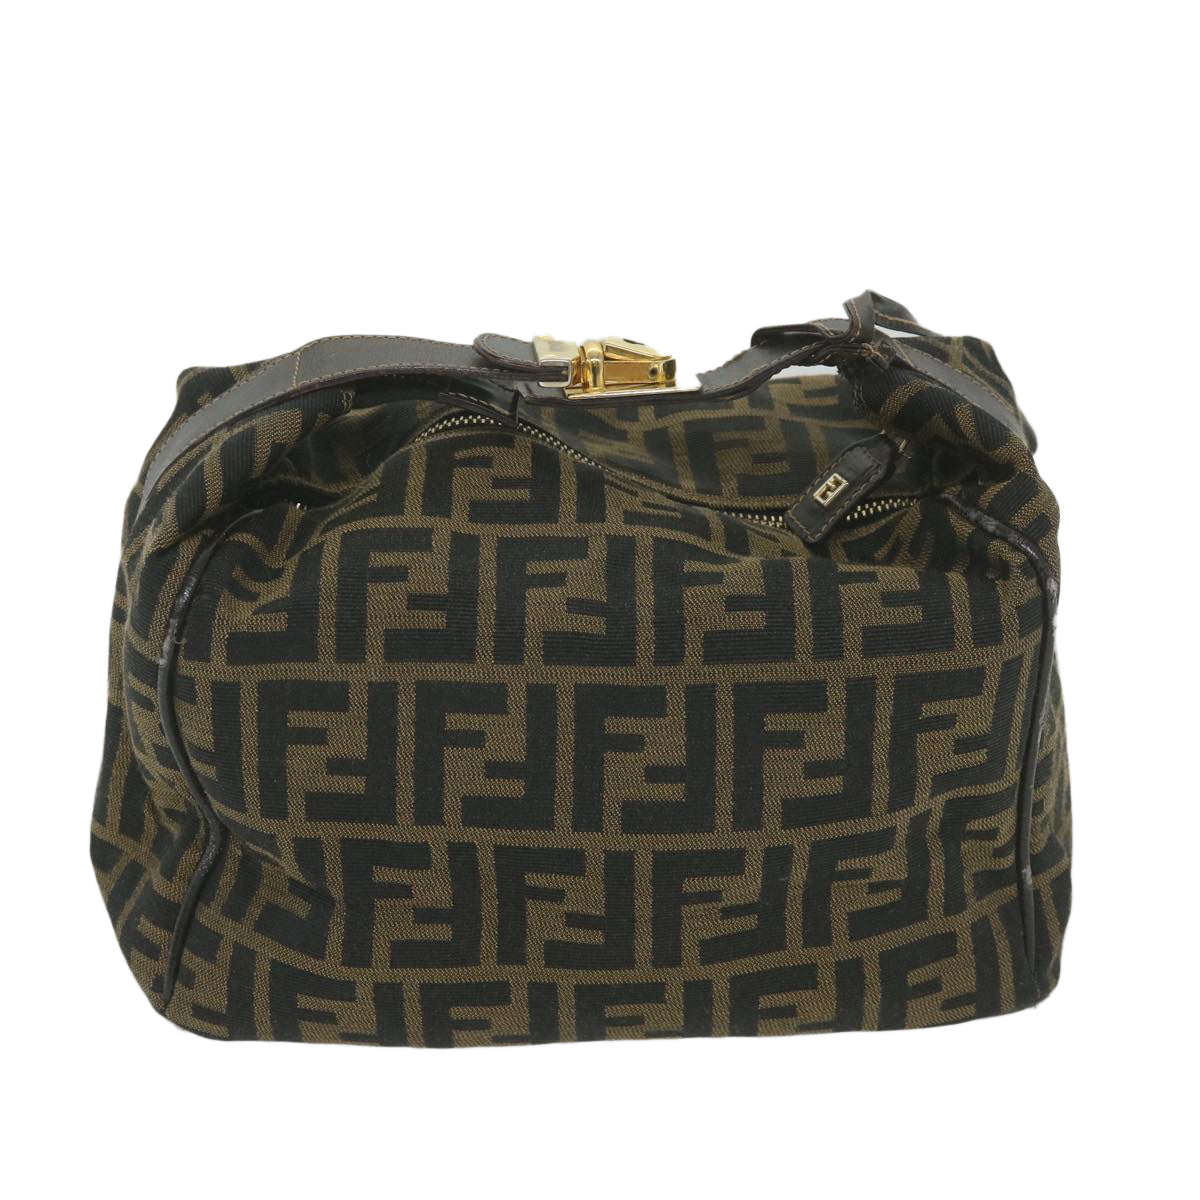 FENDI Zucca Canvas Vanity Cosmetic Pouch Black Brown Auth 59688 - 0